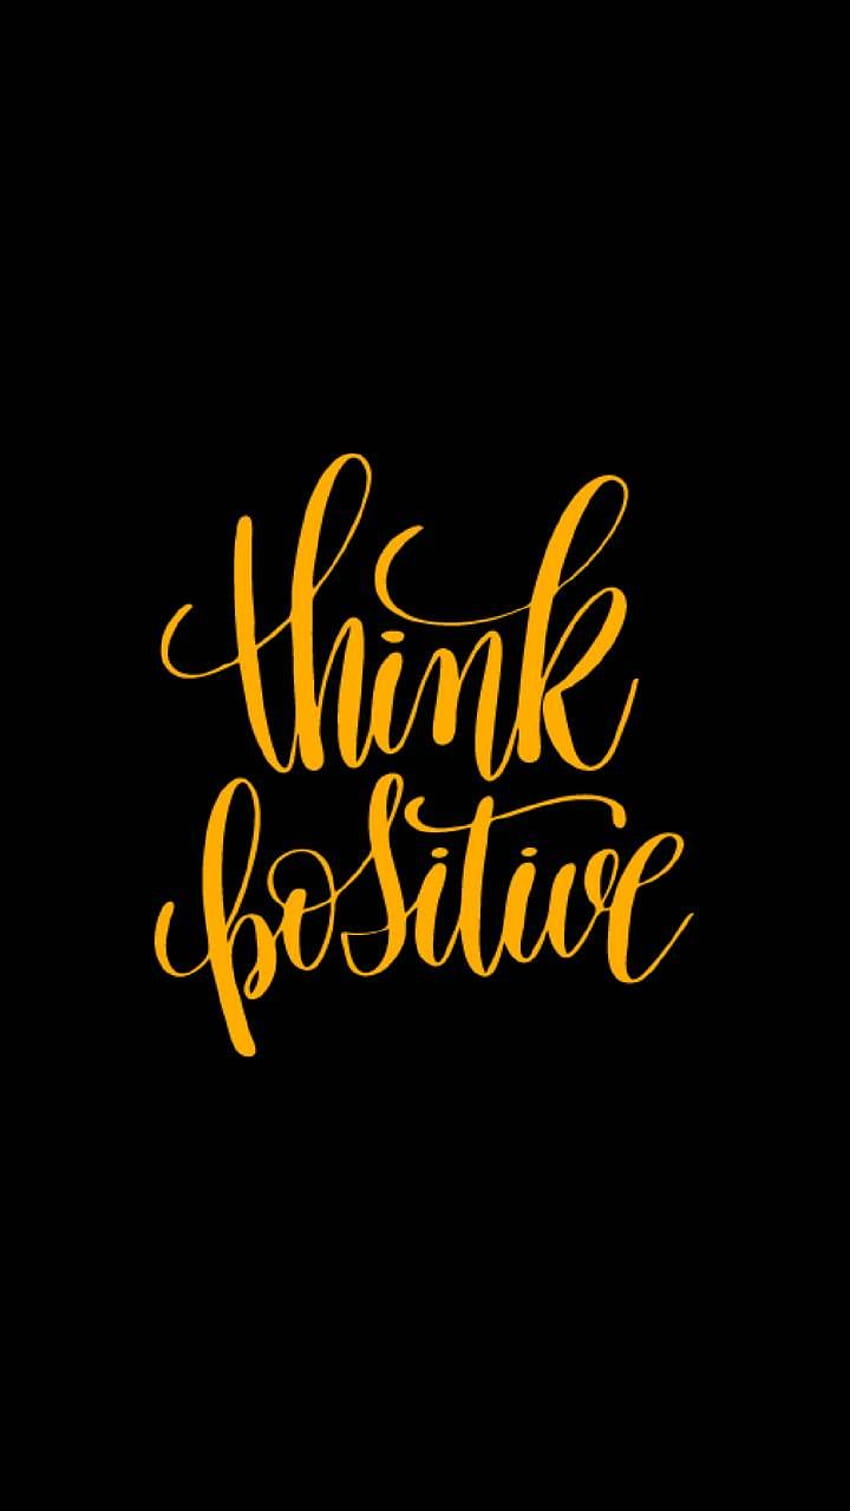 Think Positive by Mido_n wallpaper ponsel HD